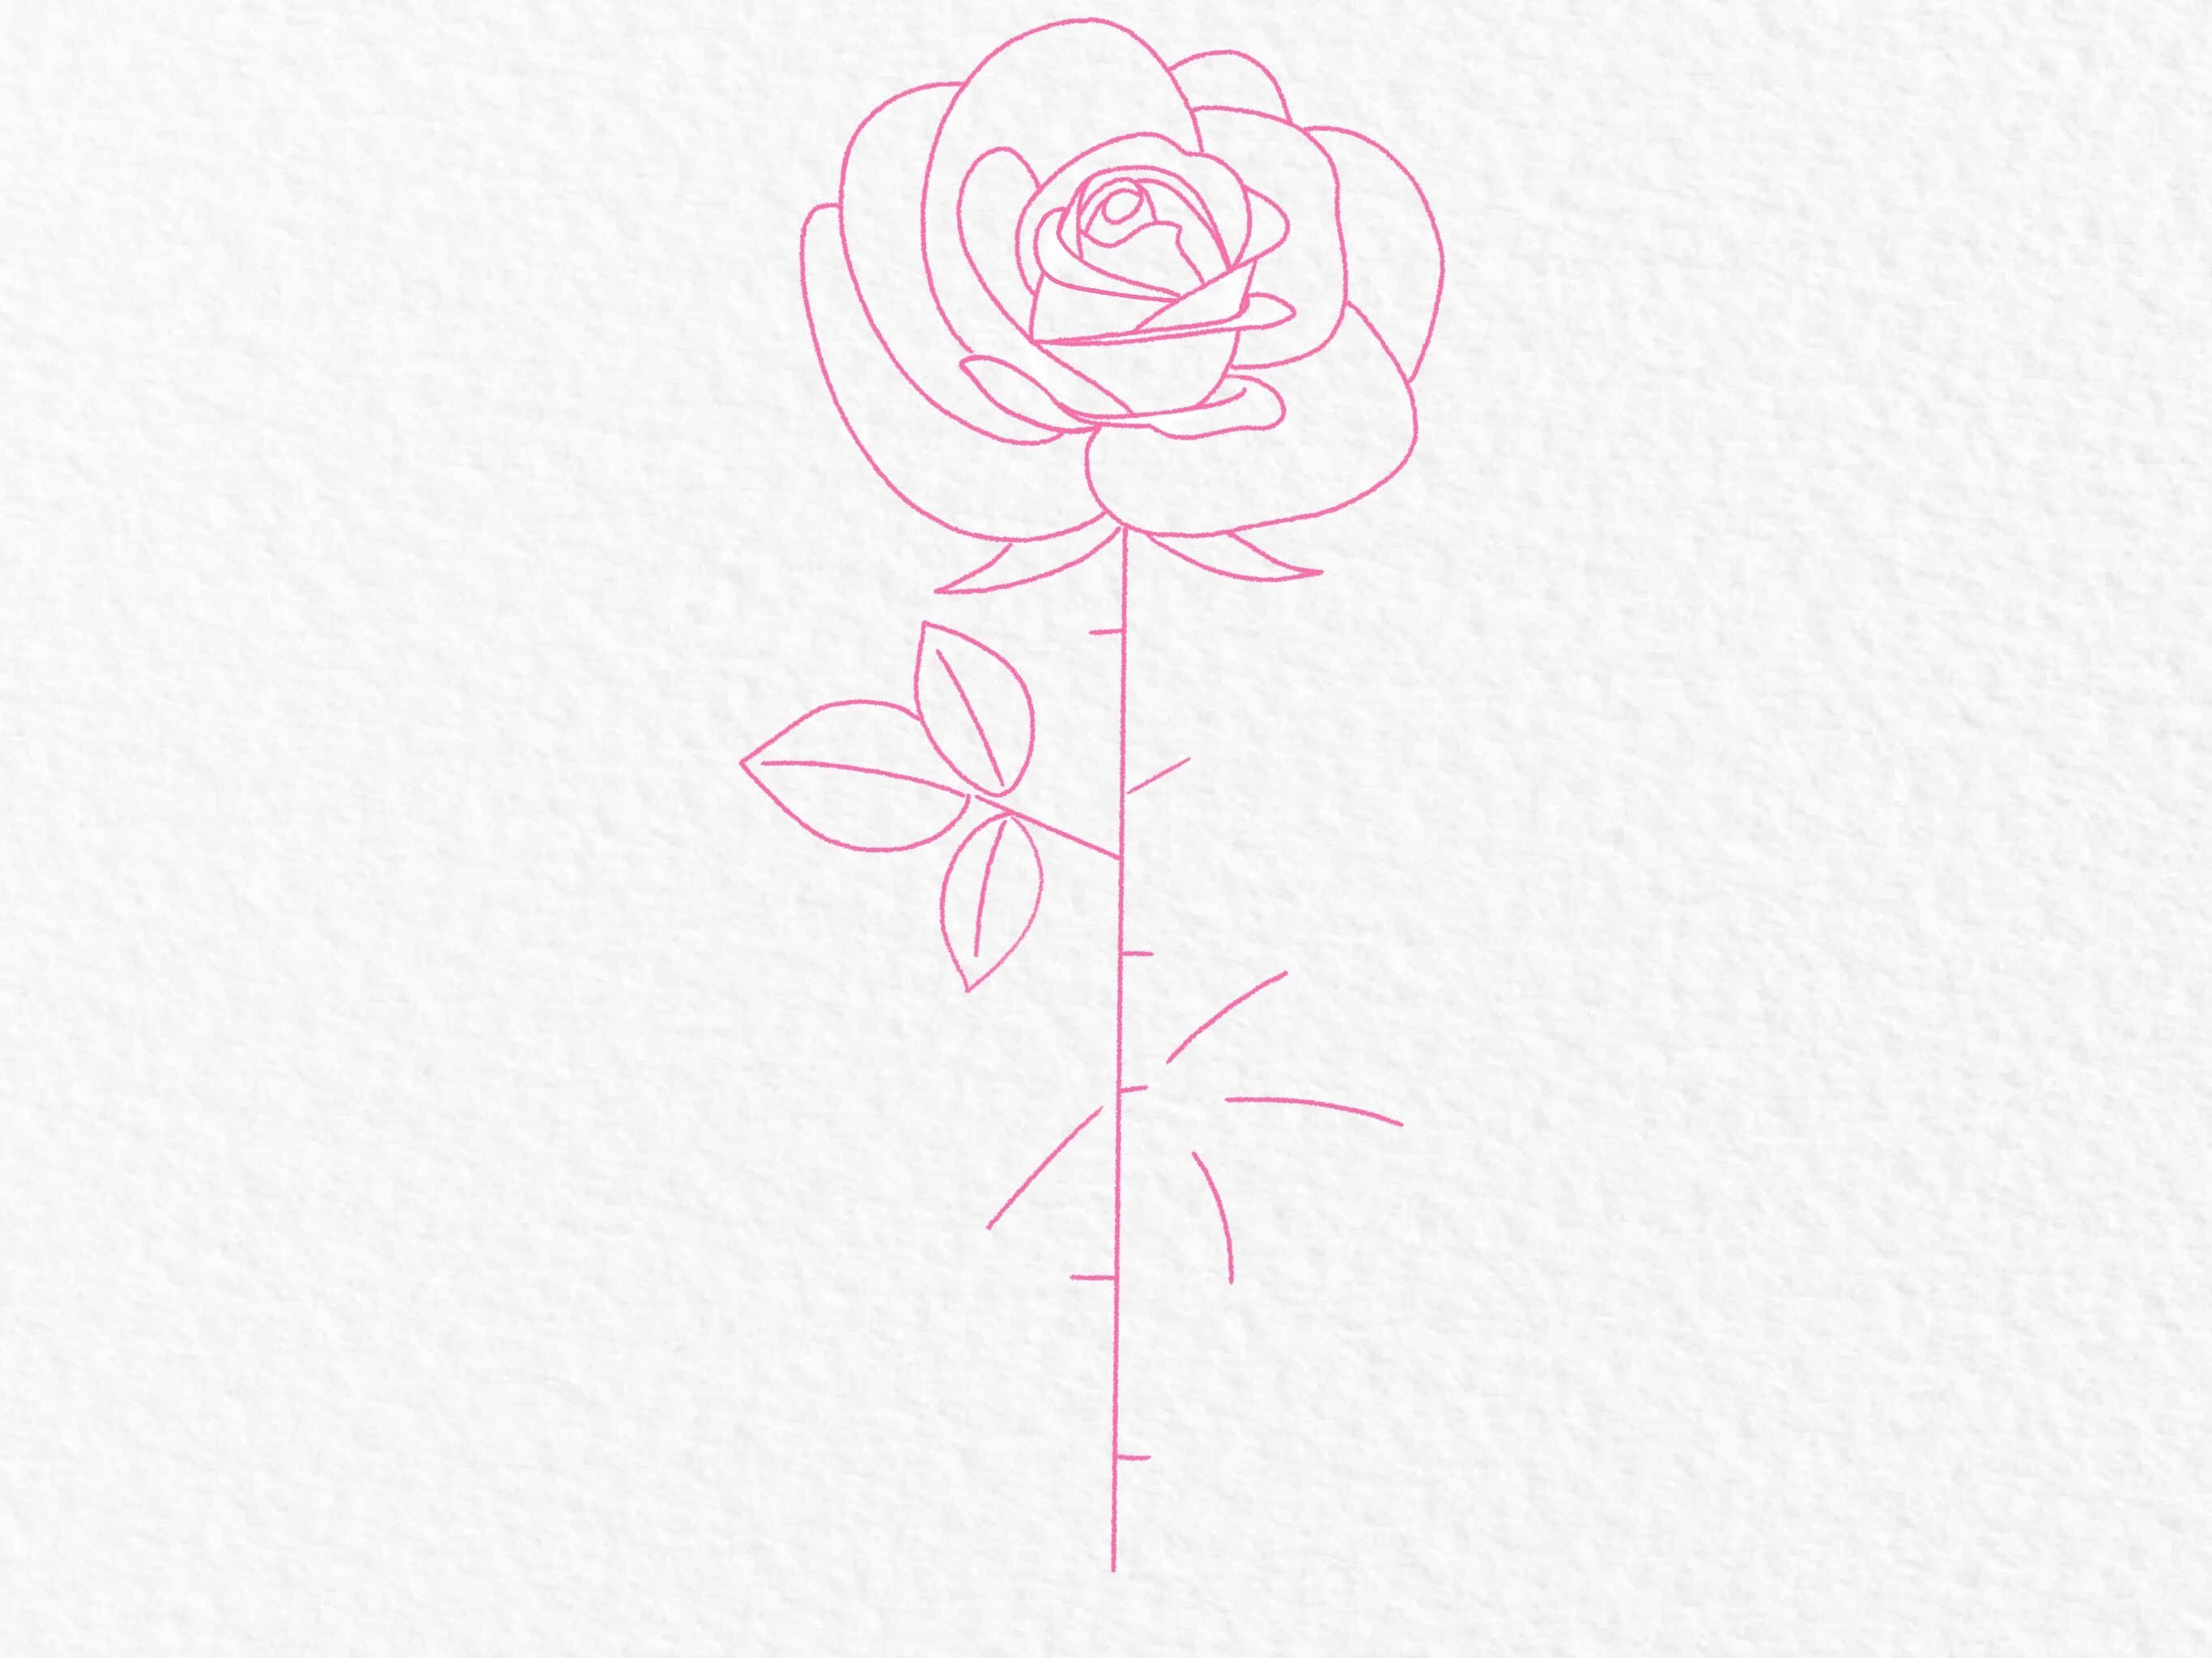 How to draw a rose, step by step drawing tutorial - step 24